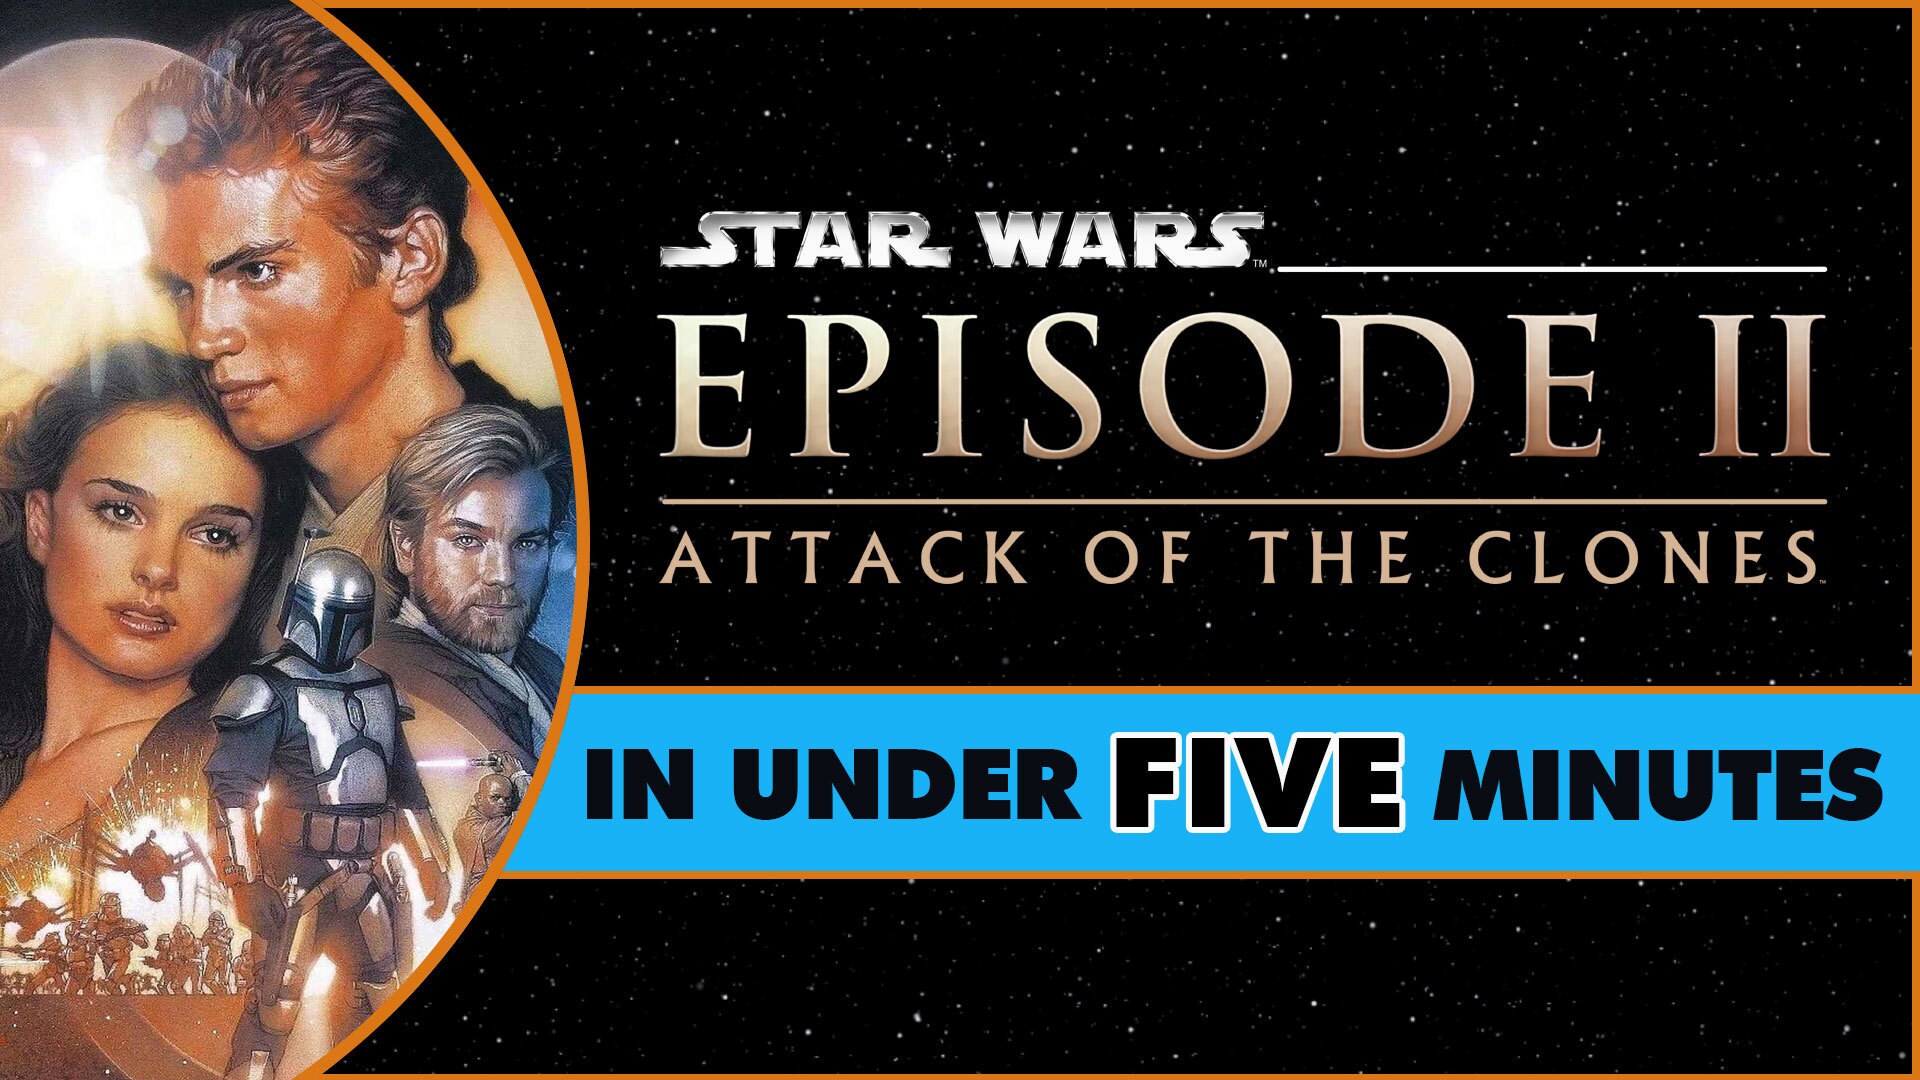 Star Wars: Attack of the Clones in Under Five Minutes